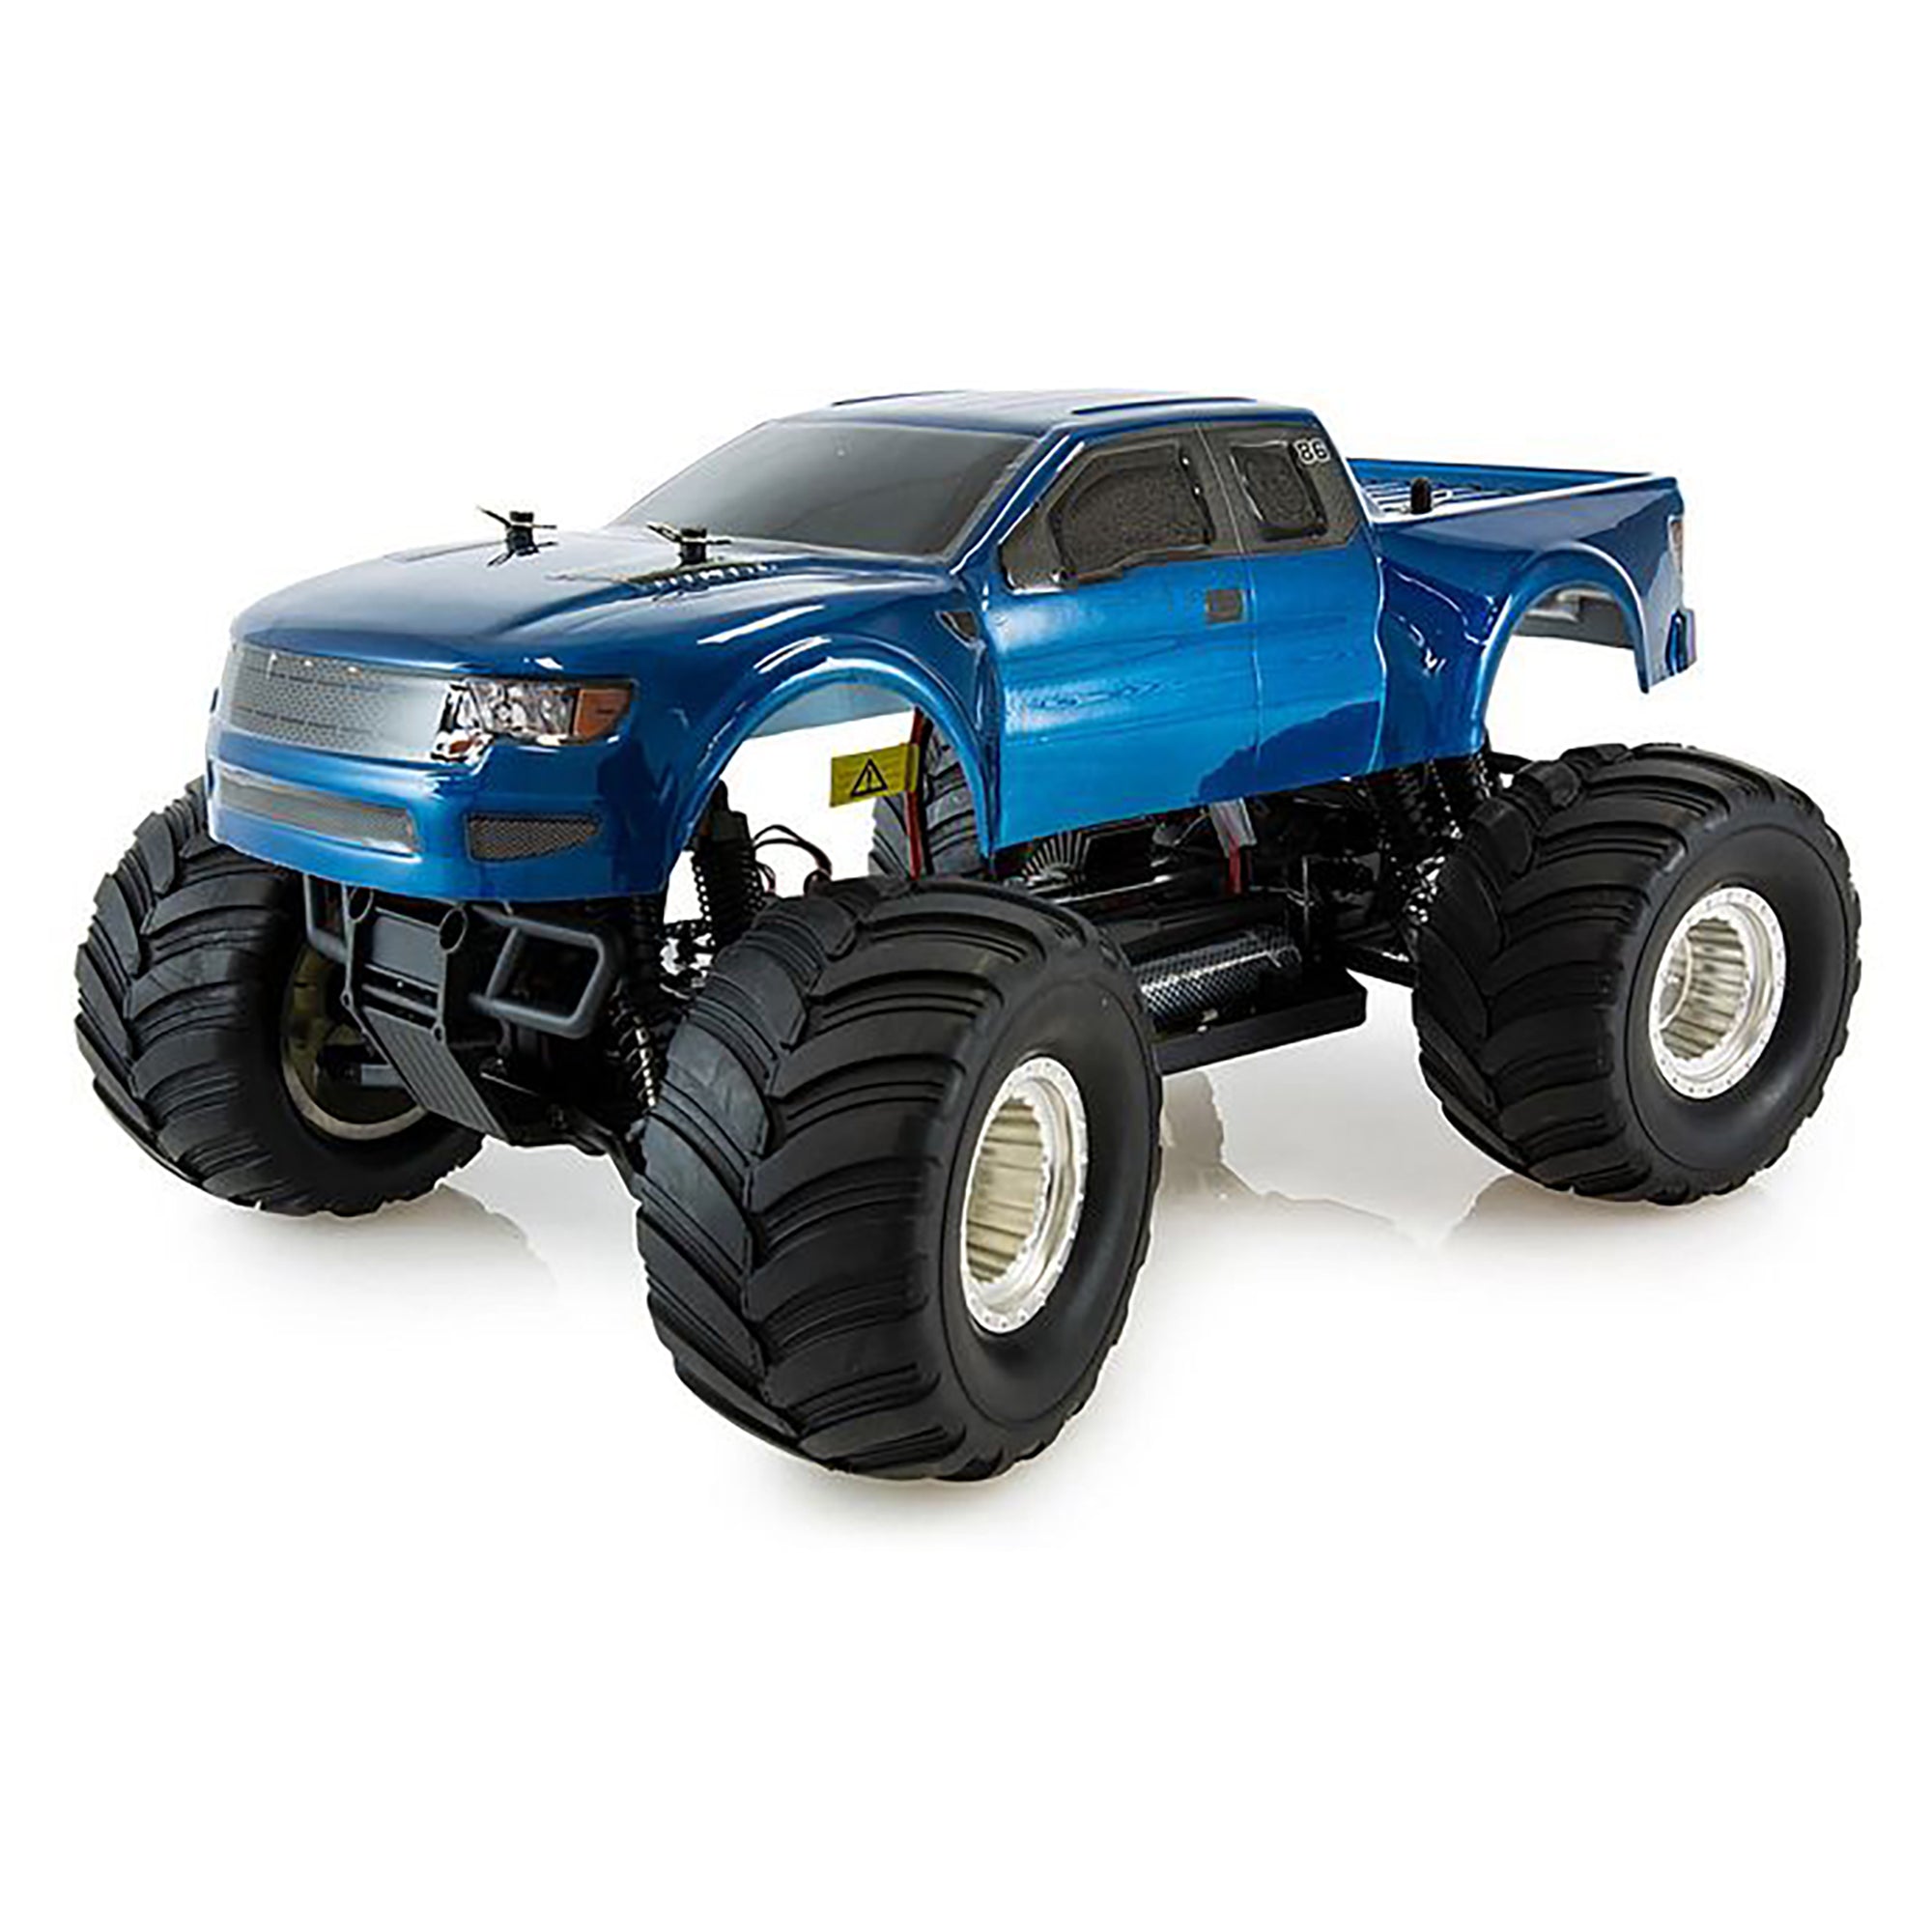 HSP Racing Monster Truck 94111-01053 2.4Ghz Electric 4WD Off Road RTR RC Truck